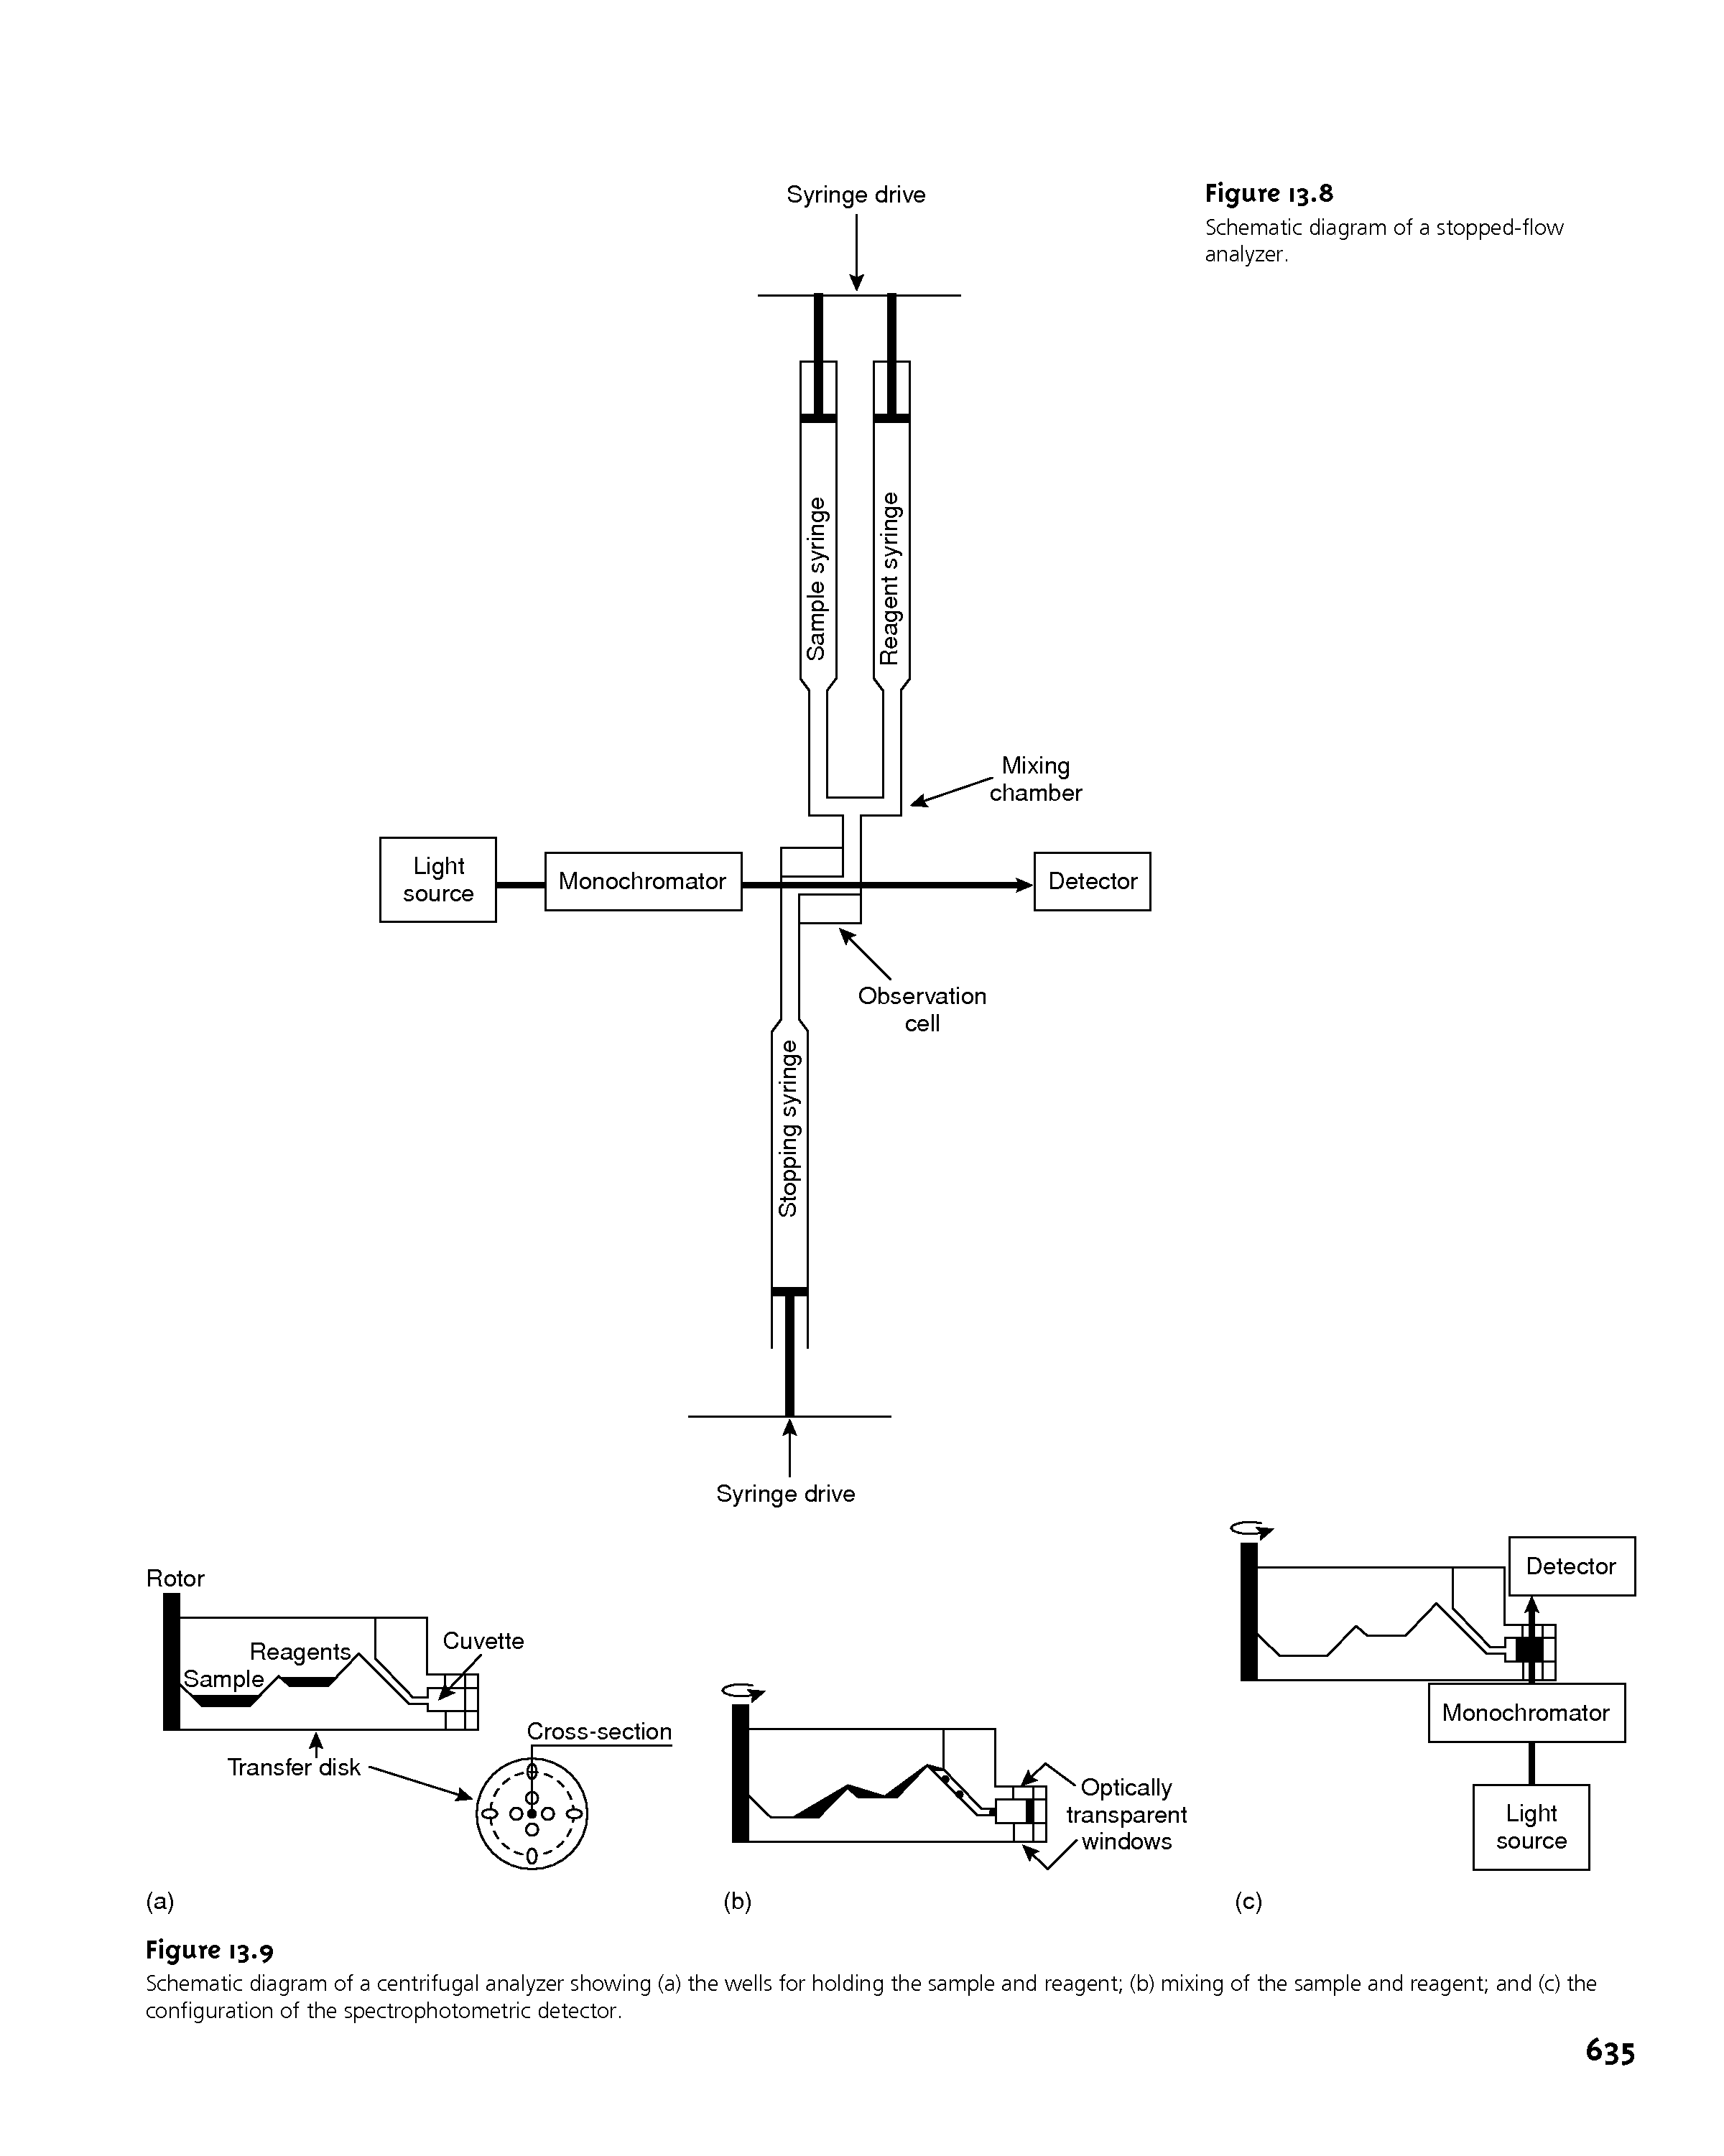 Schematic diagram of a centrifugai anaiyzer showing (a) the weiis for hoiding the sampie and reagent (b) mixing of the sampie and reagent and (c) the configuration of the spectrophotometric detector.